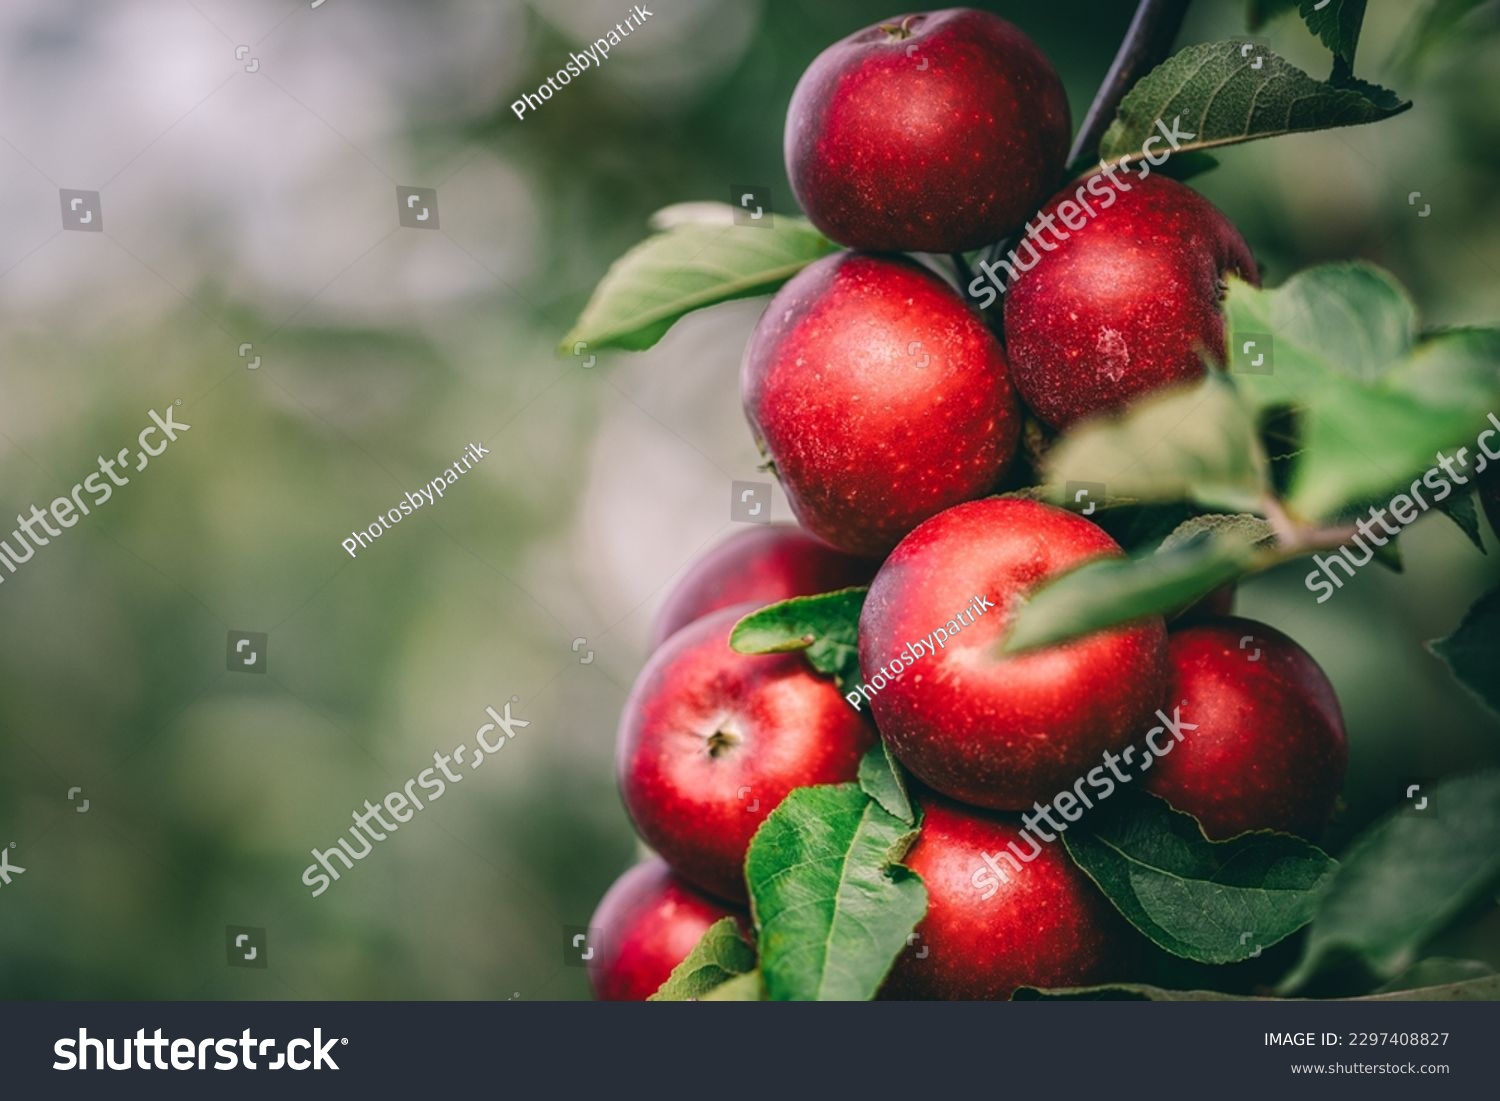 Red apples on tree ready to be harvested. Ripe red apple fruits in apple orchard. Selective focus. #2297408827